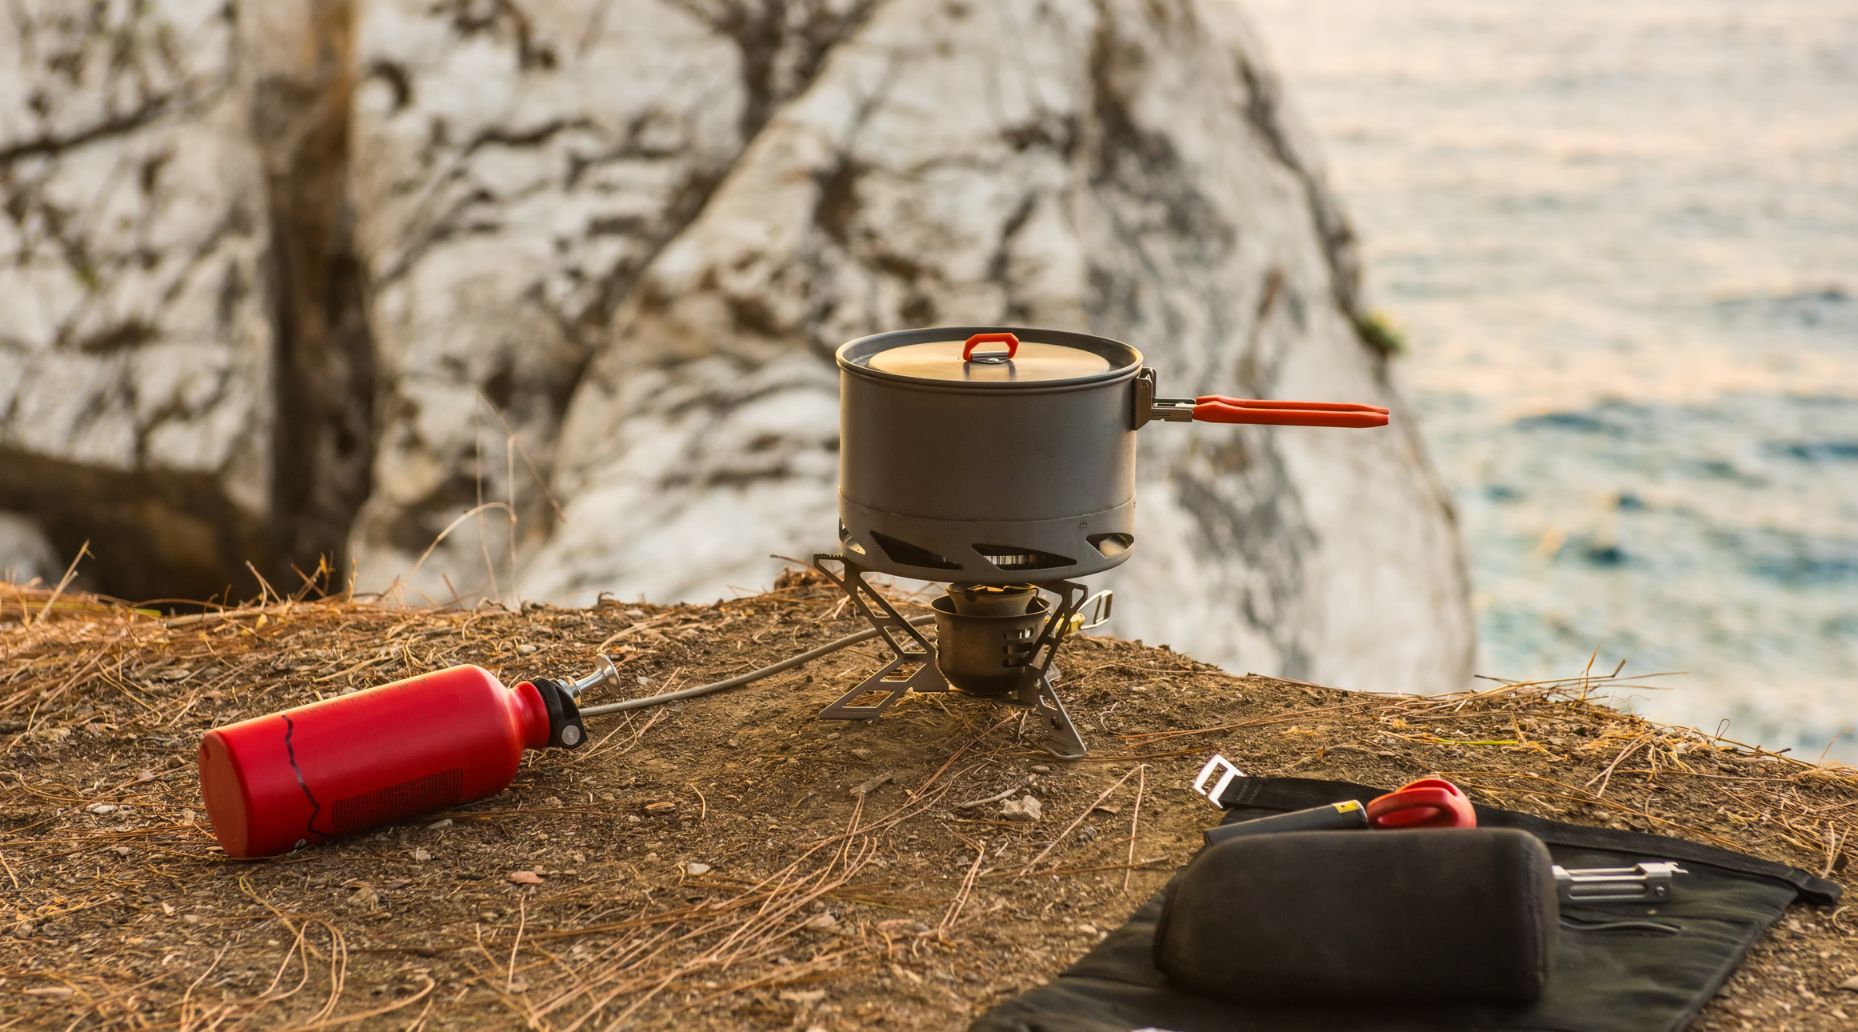 A camping stove with a saucepan on top, with cliffs and ocean in the background.